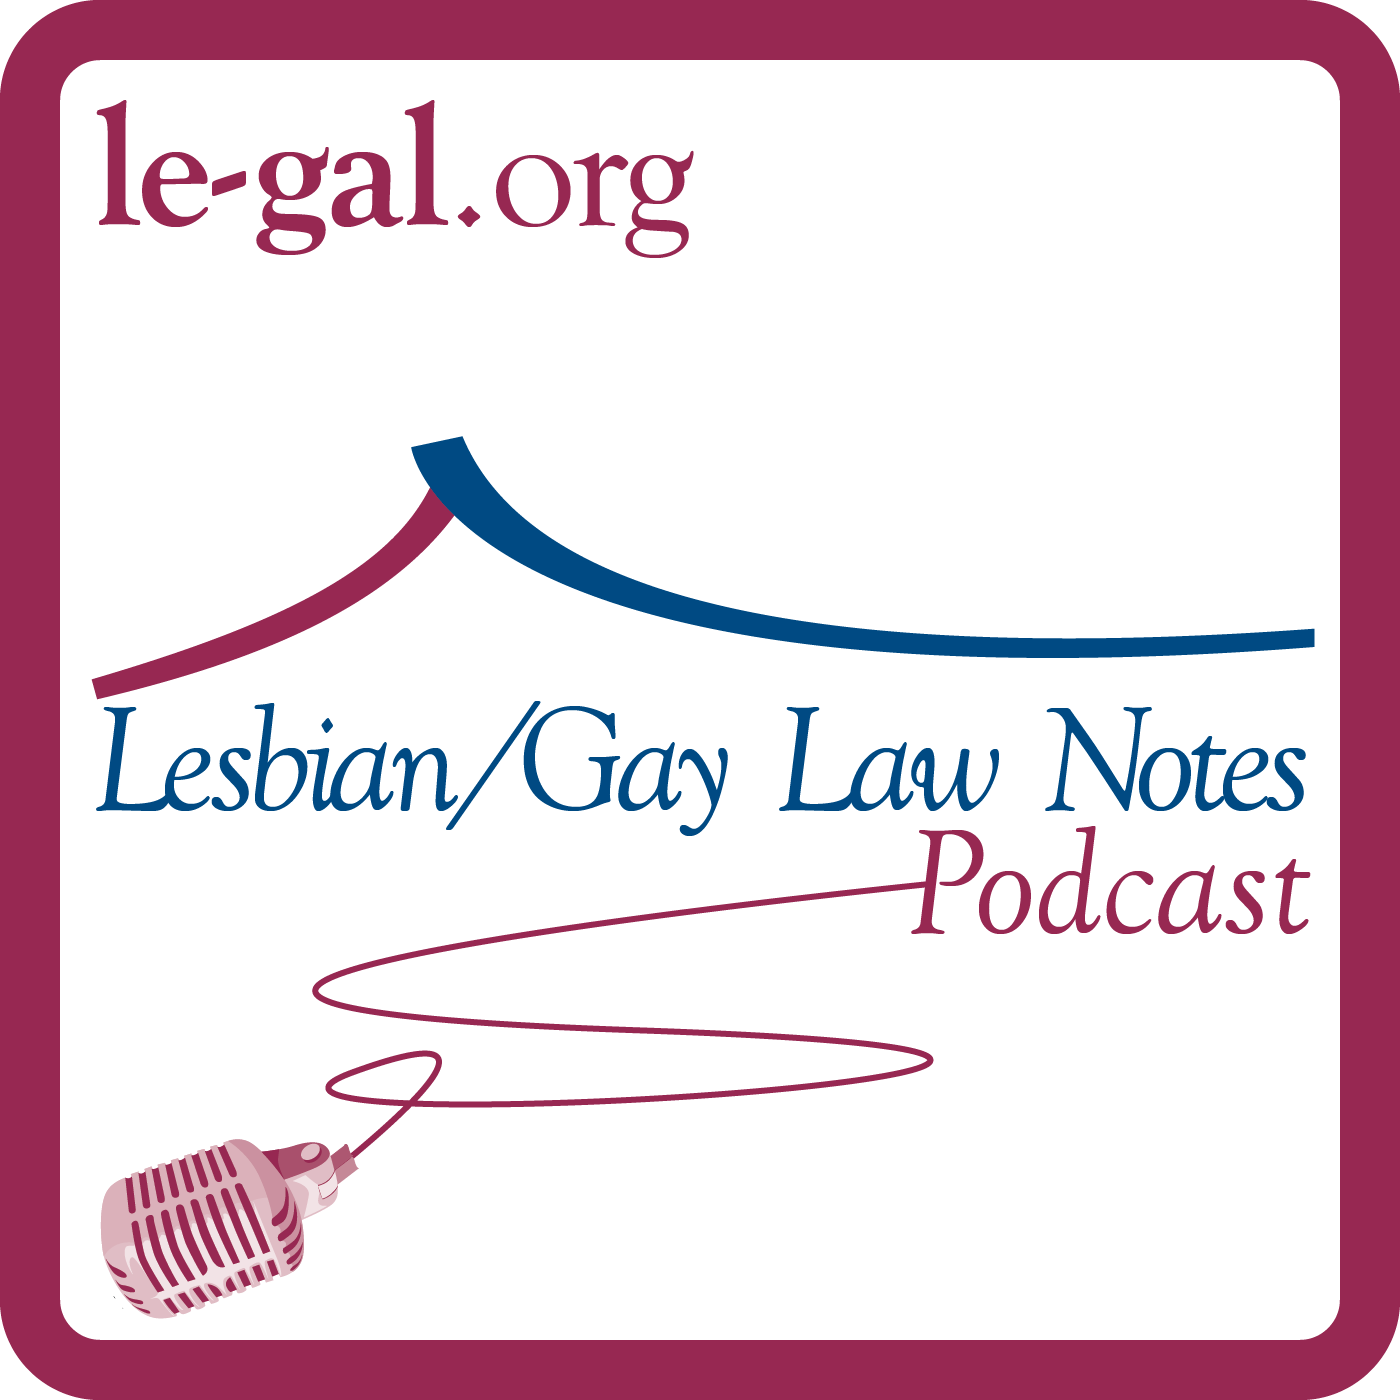 Lesbian/Gay Law Notes Podcast: May 2014